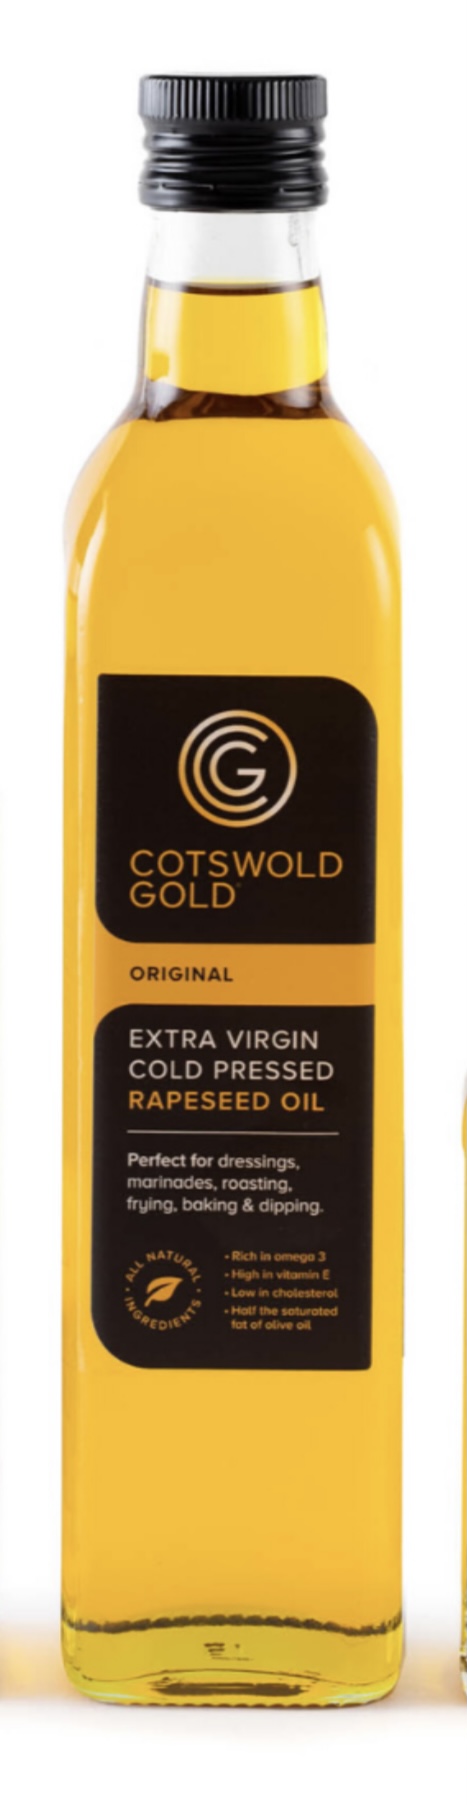 Cotswold Gold Extra Virgin Cold Pressed Rapeseed Oil 500g